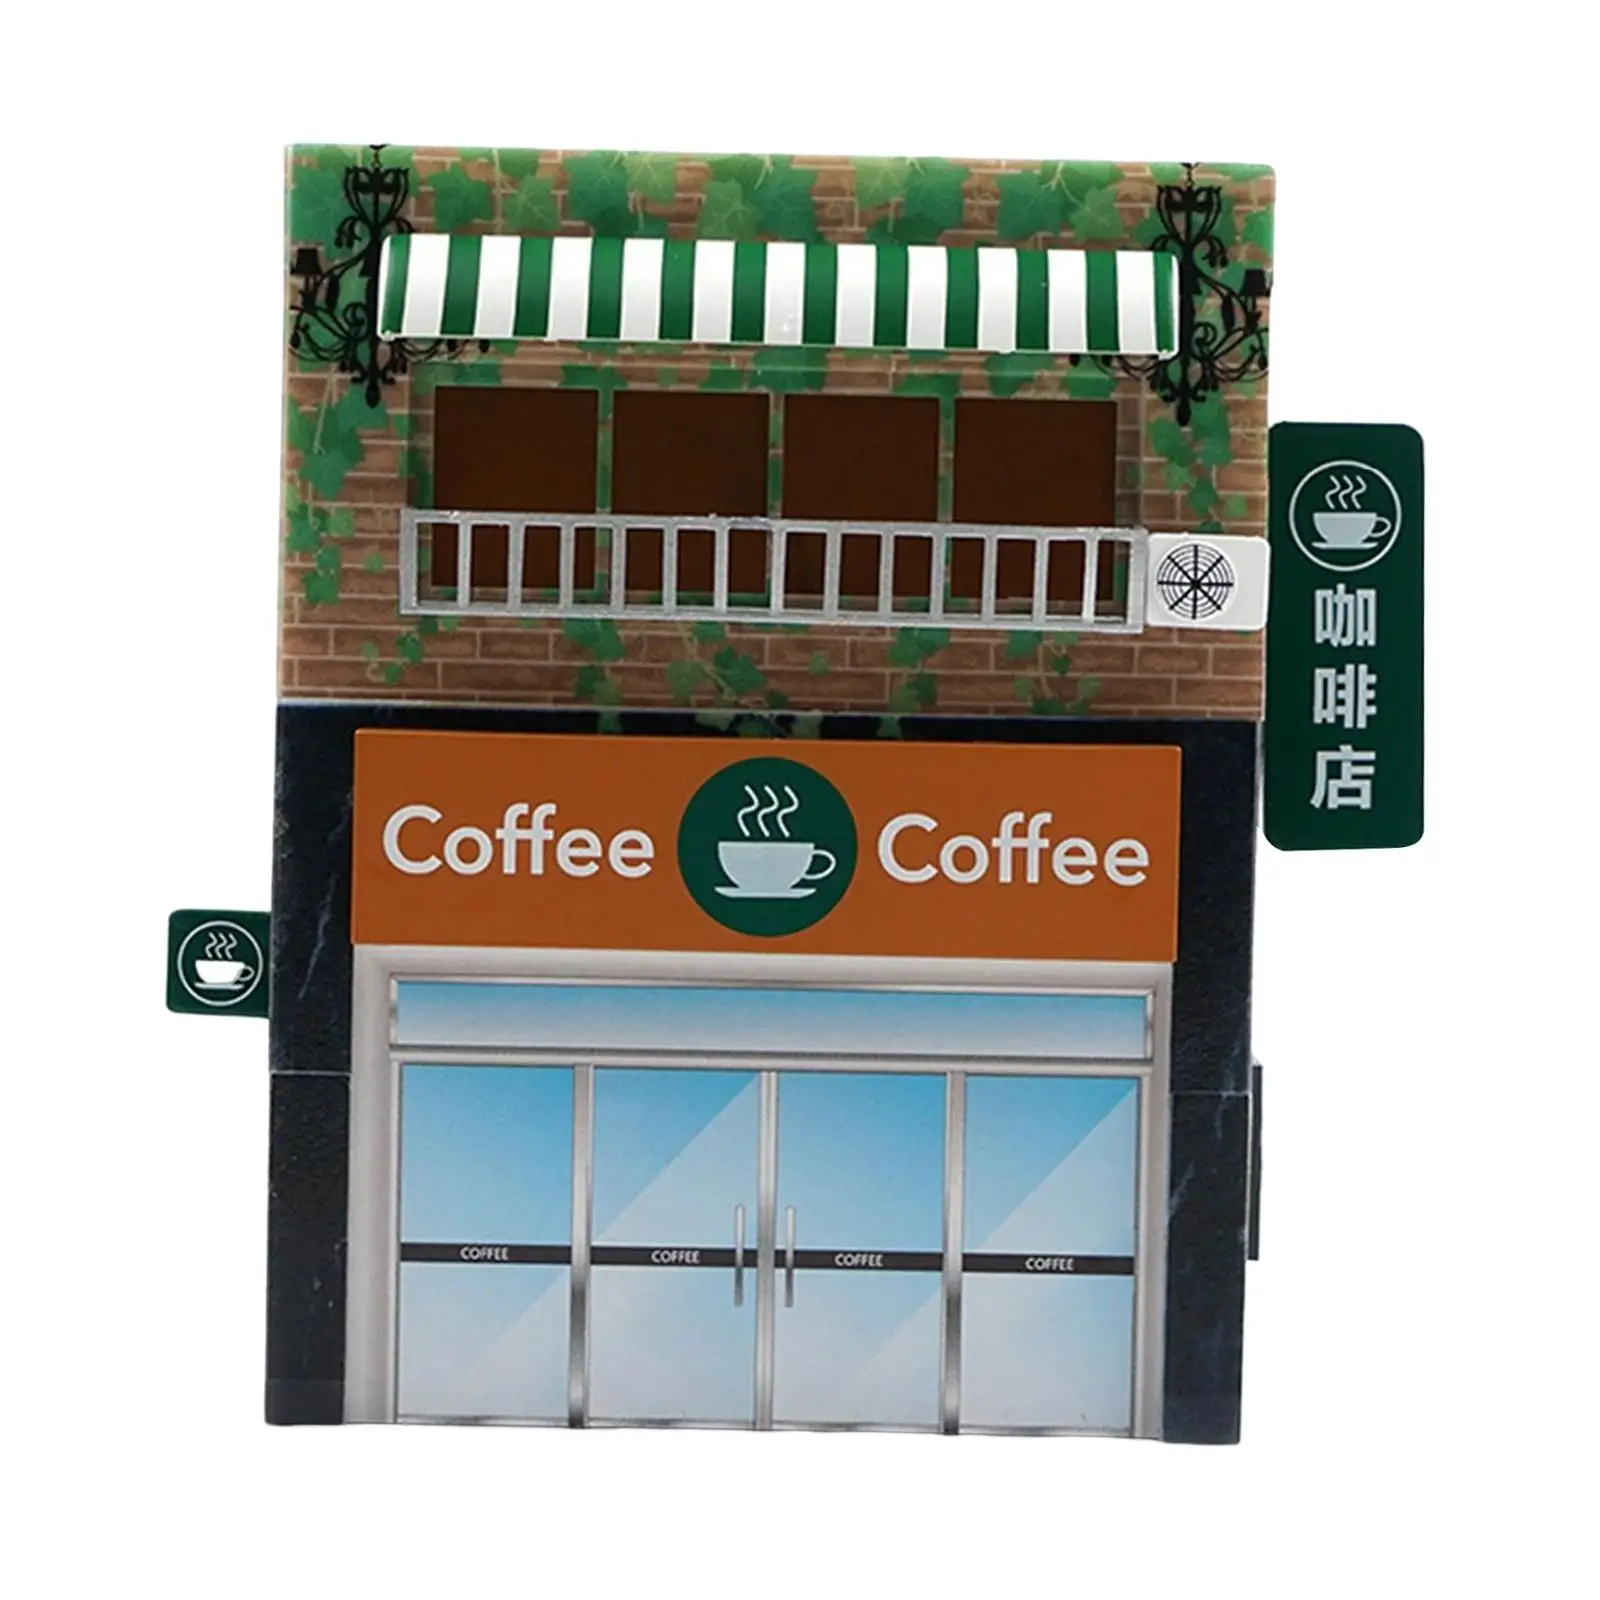 1:64 Simulation Cafe Decorative Collectibles for DIY Projects Adults